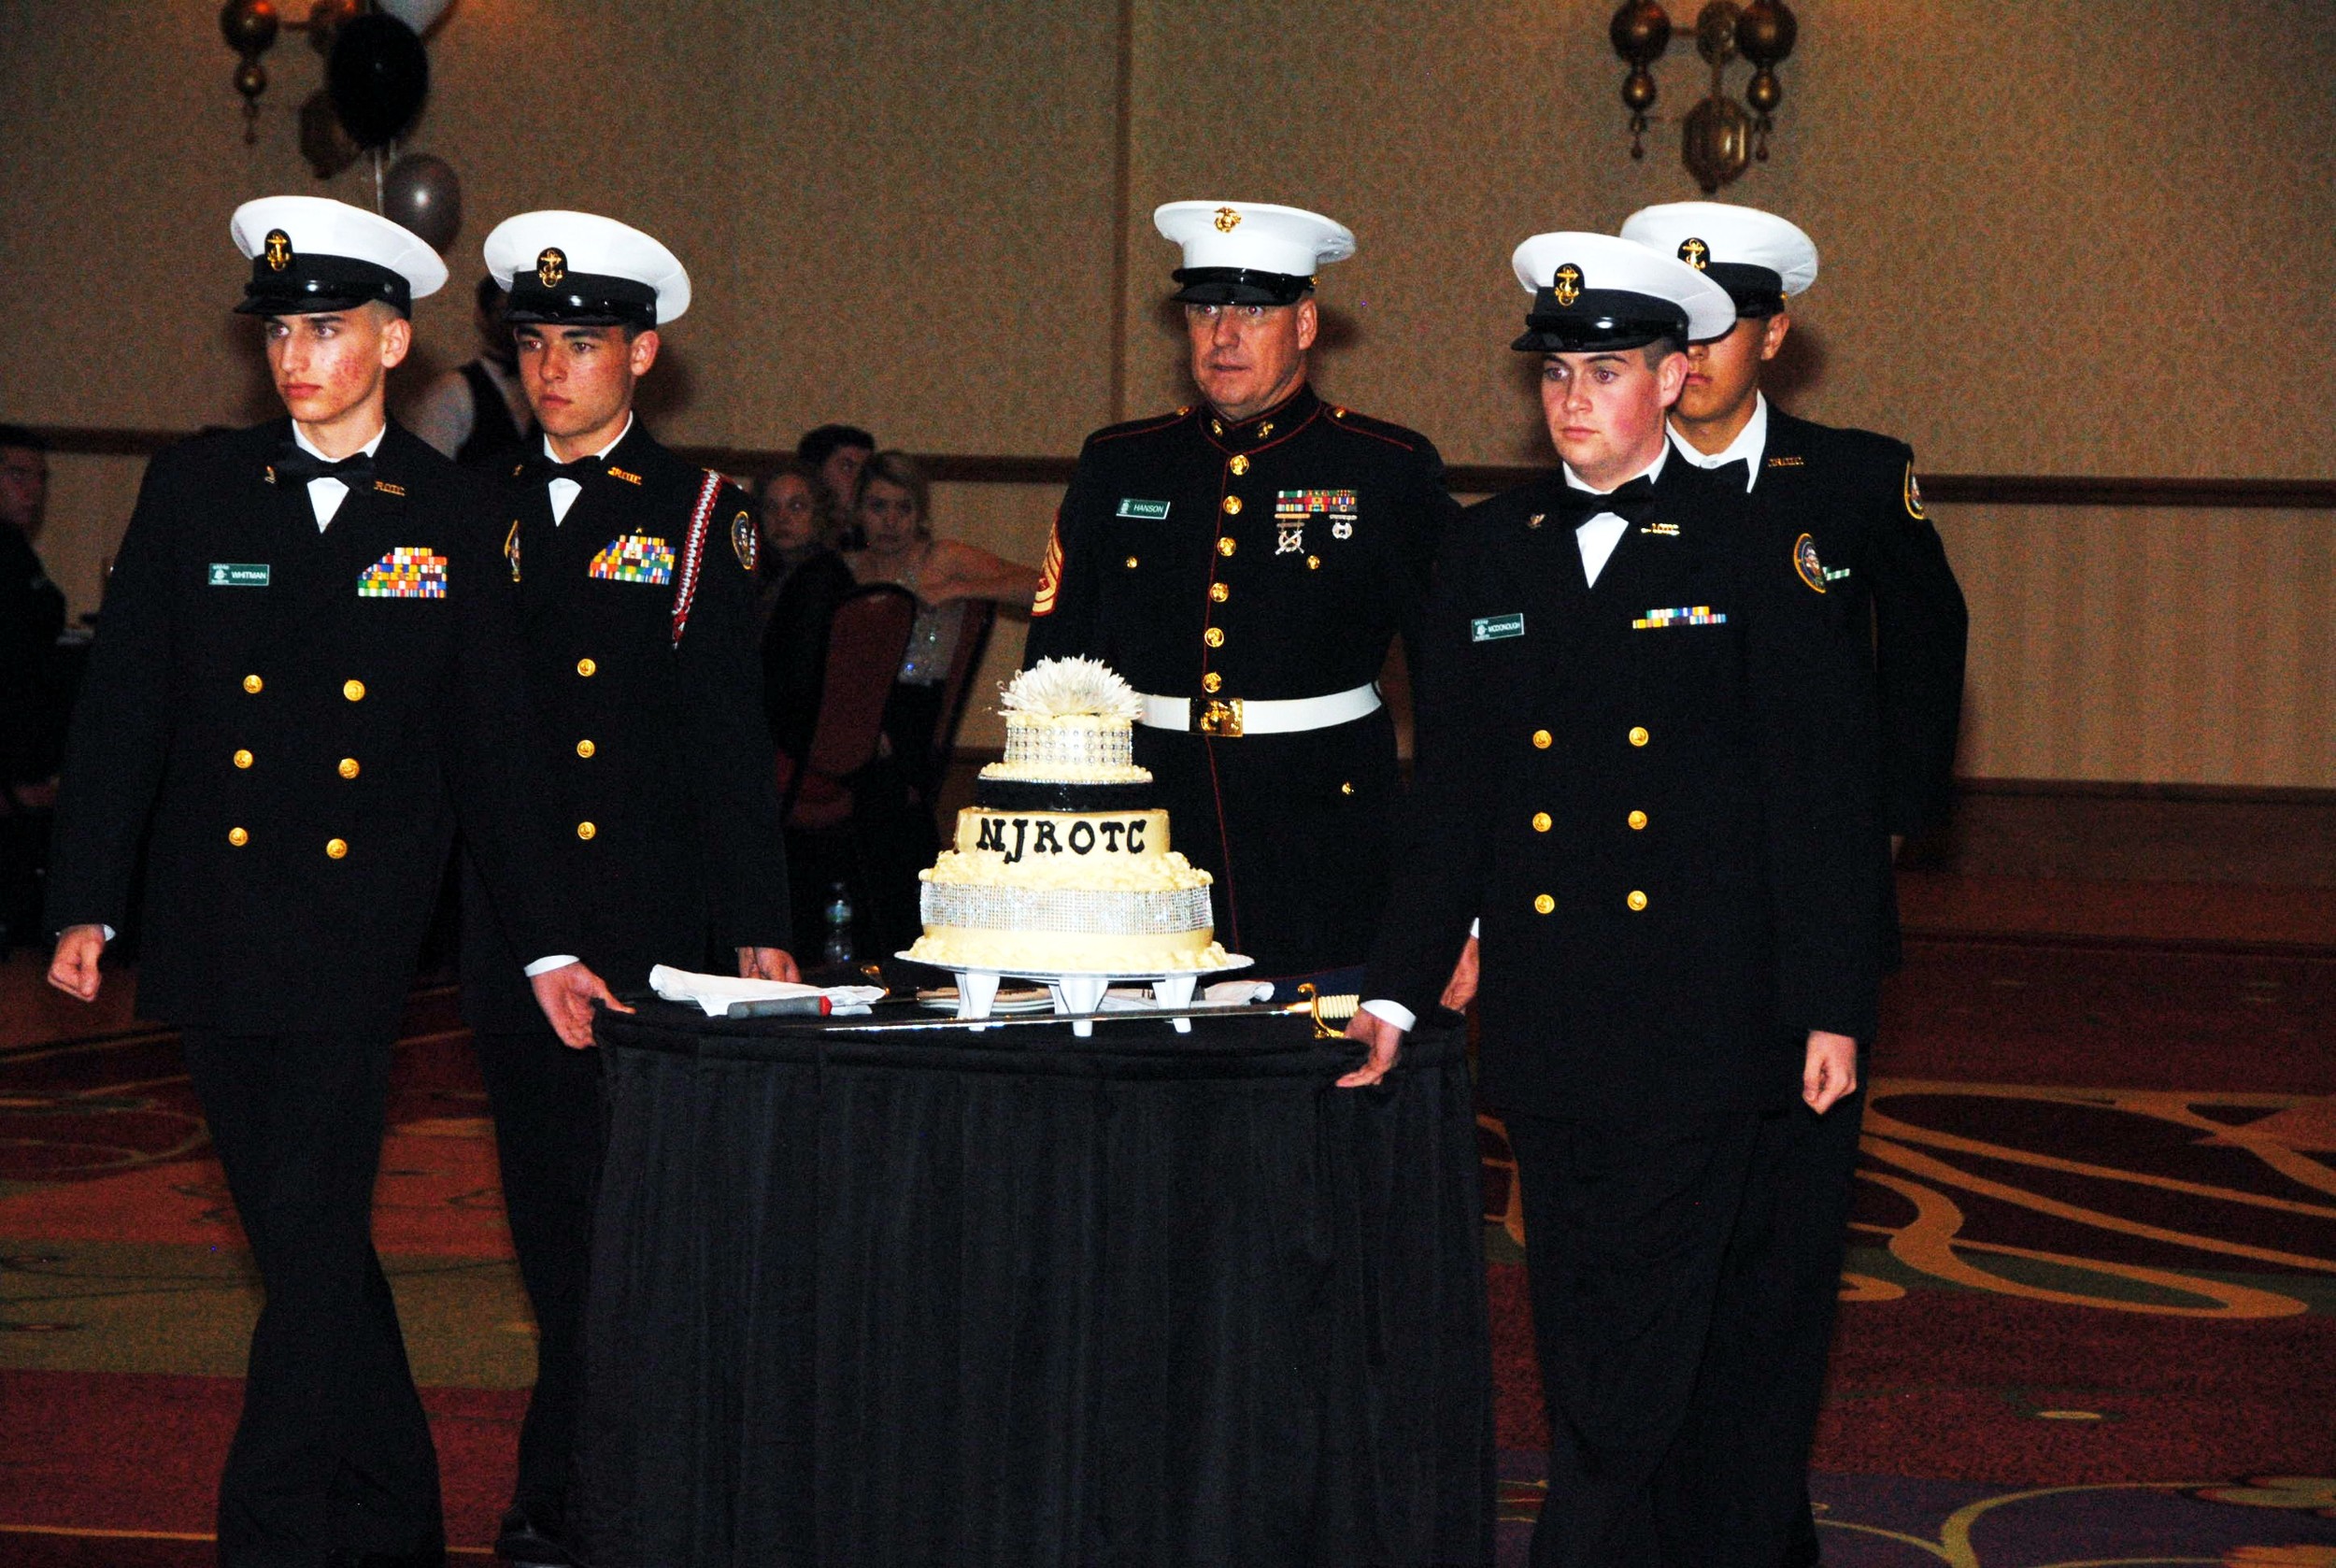 Nease NJROTC cadets (left to right) Chris Gilmer, Chris McDonough, Alex DeRoven and Preston Whitman formally present the cake under the direction of Gunnery Sergeant Duane Hanson during the 23rd annual Navy Ball.